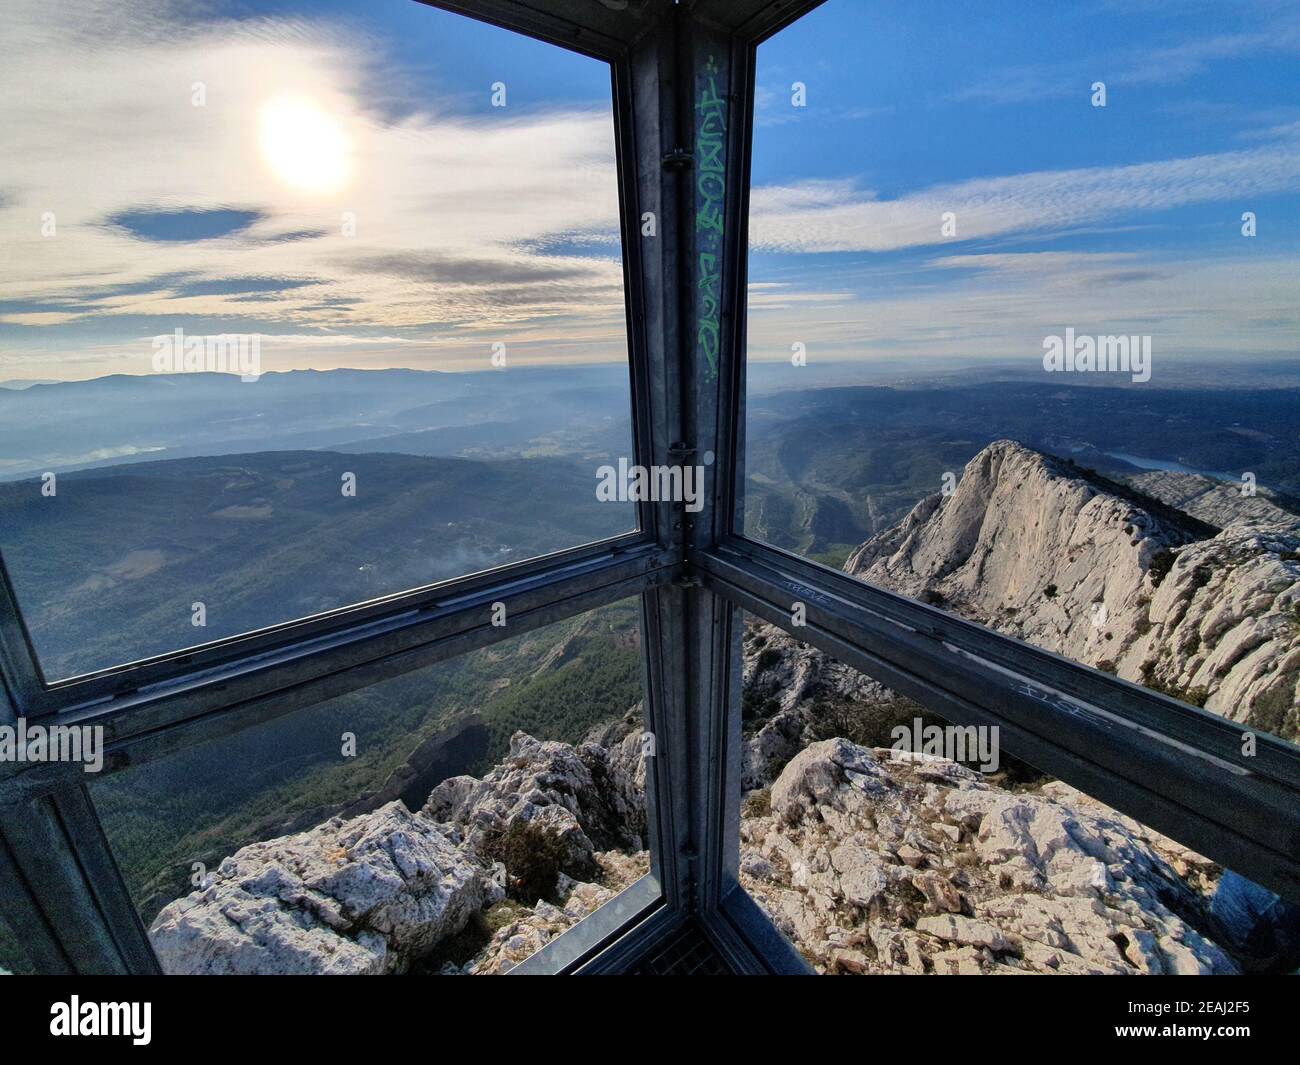 Beautiful shot of Sainte-Victoire Mountain in Province, France Stock Photo